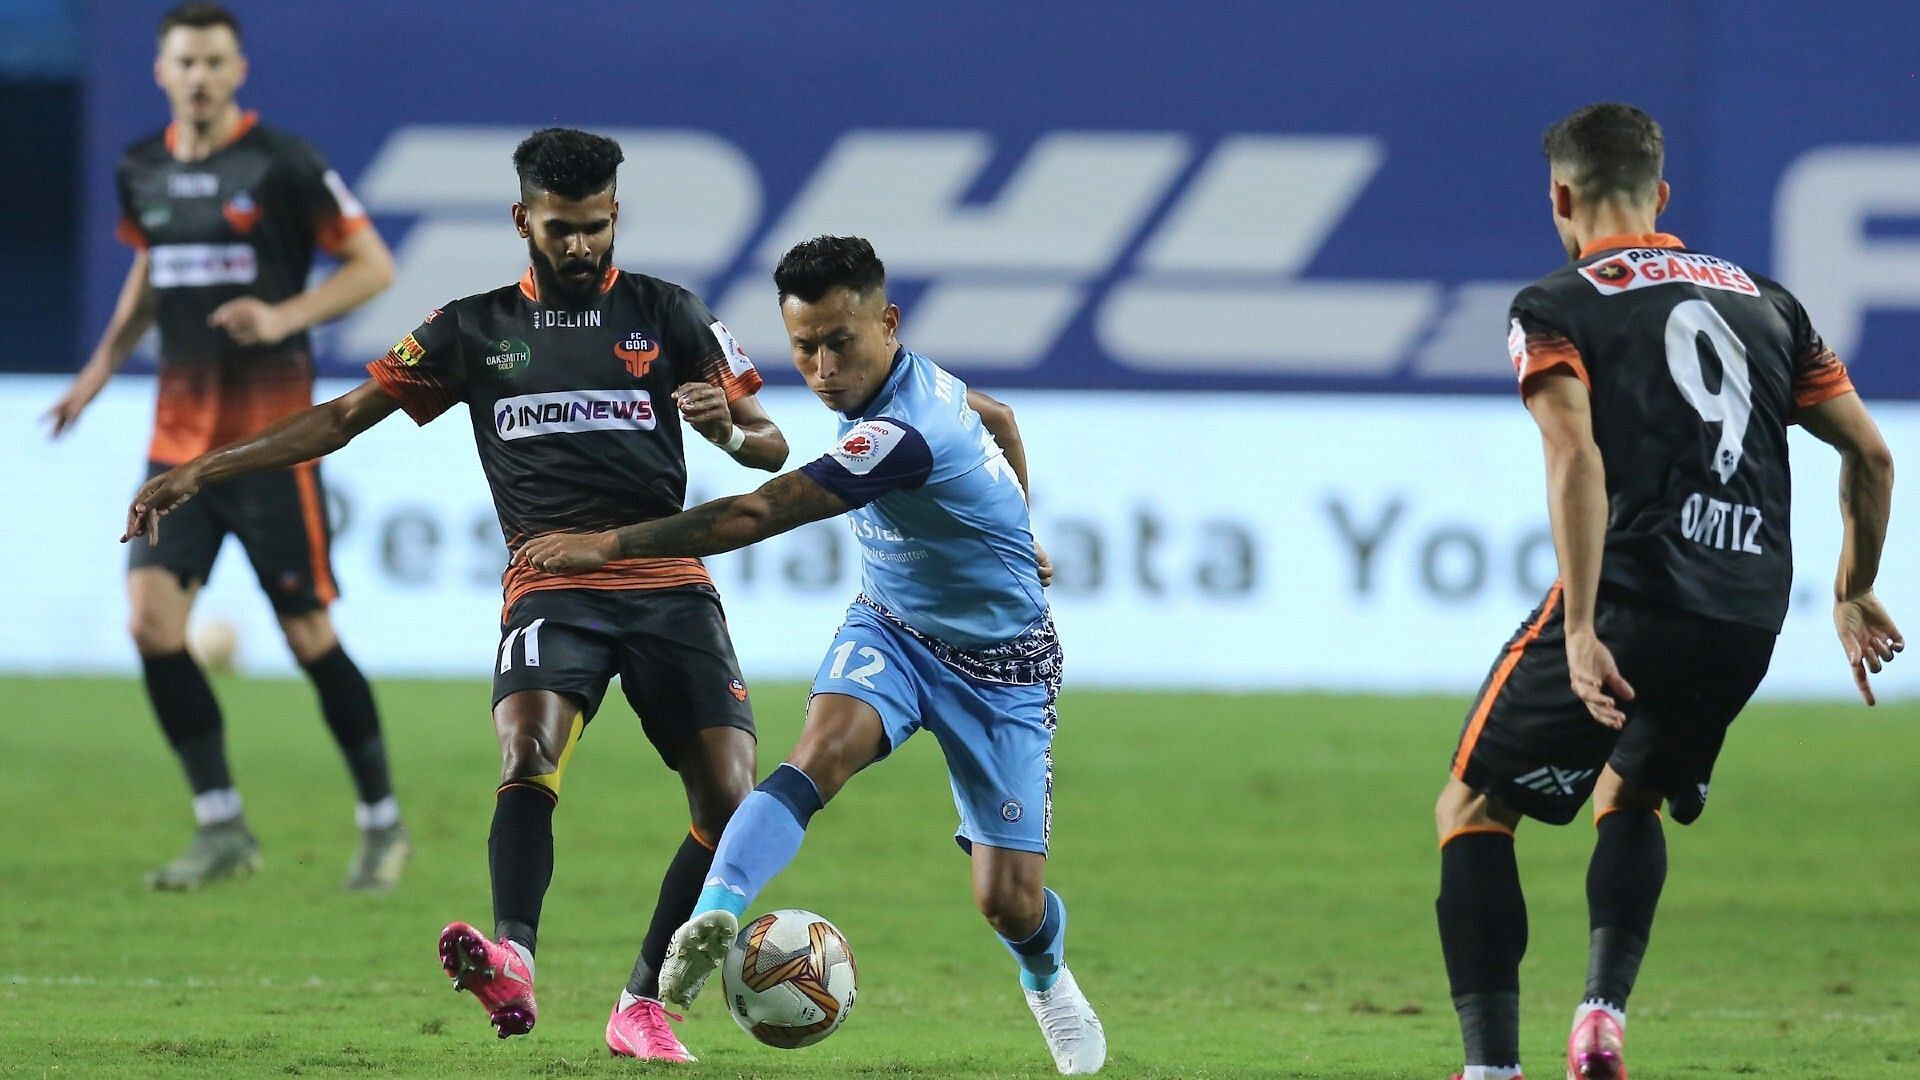 Jamshedpur FC have beaten FC Goa on two occasions in the past. (Image: ISL)